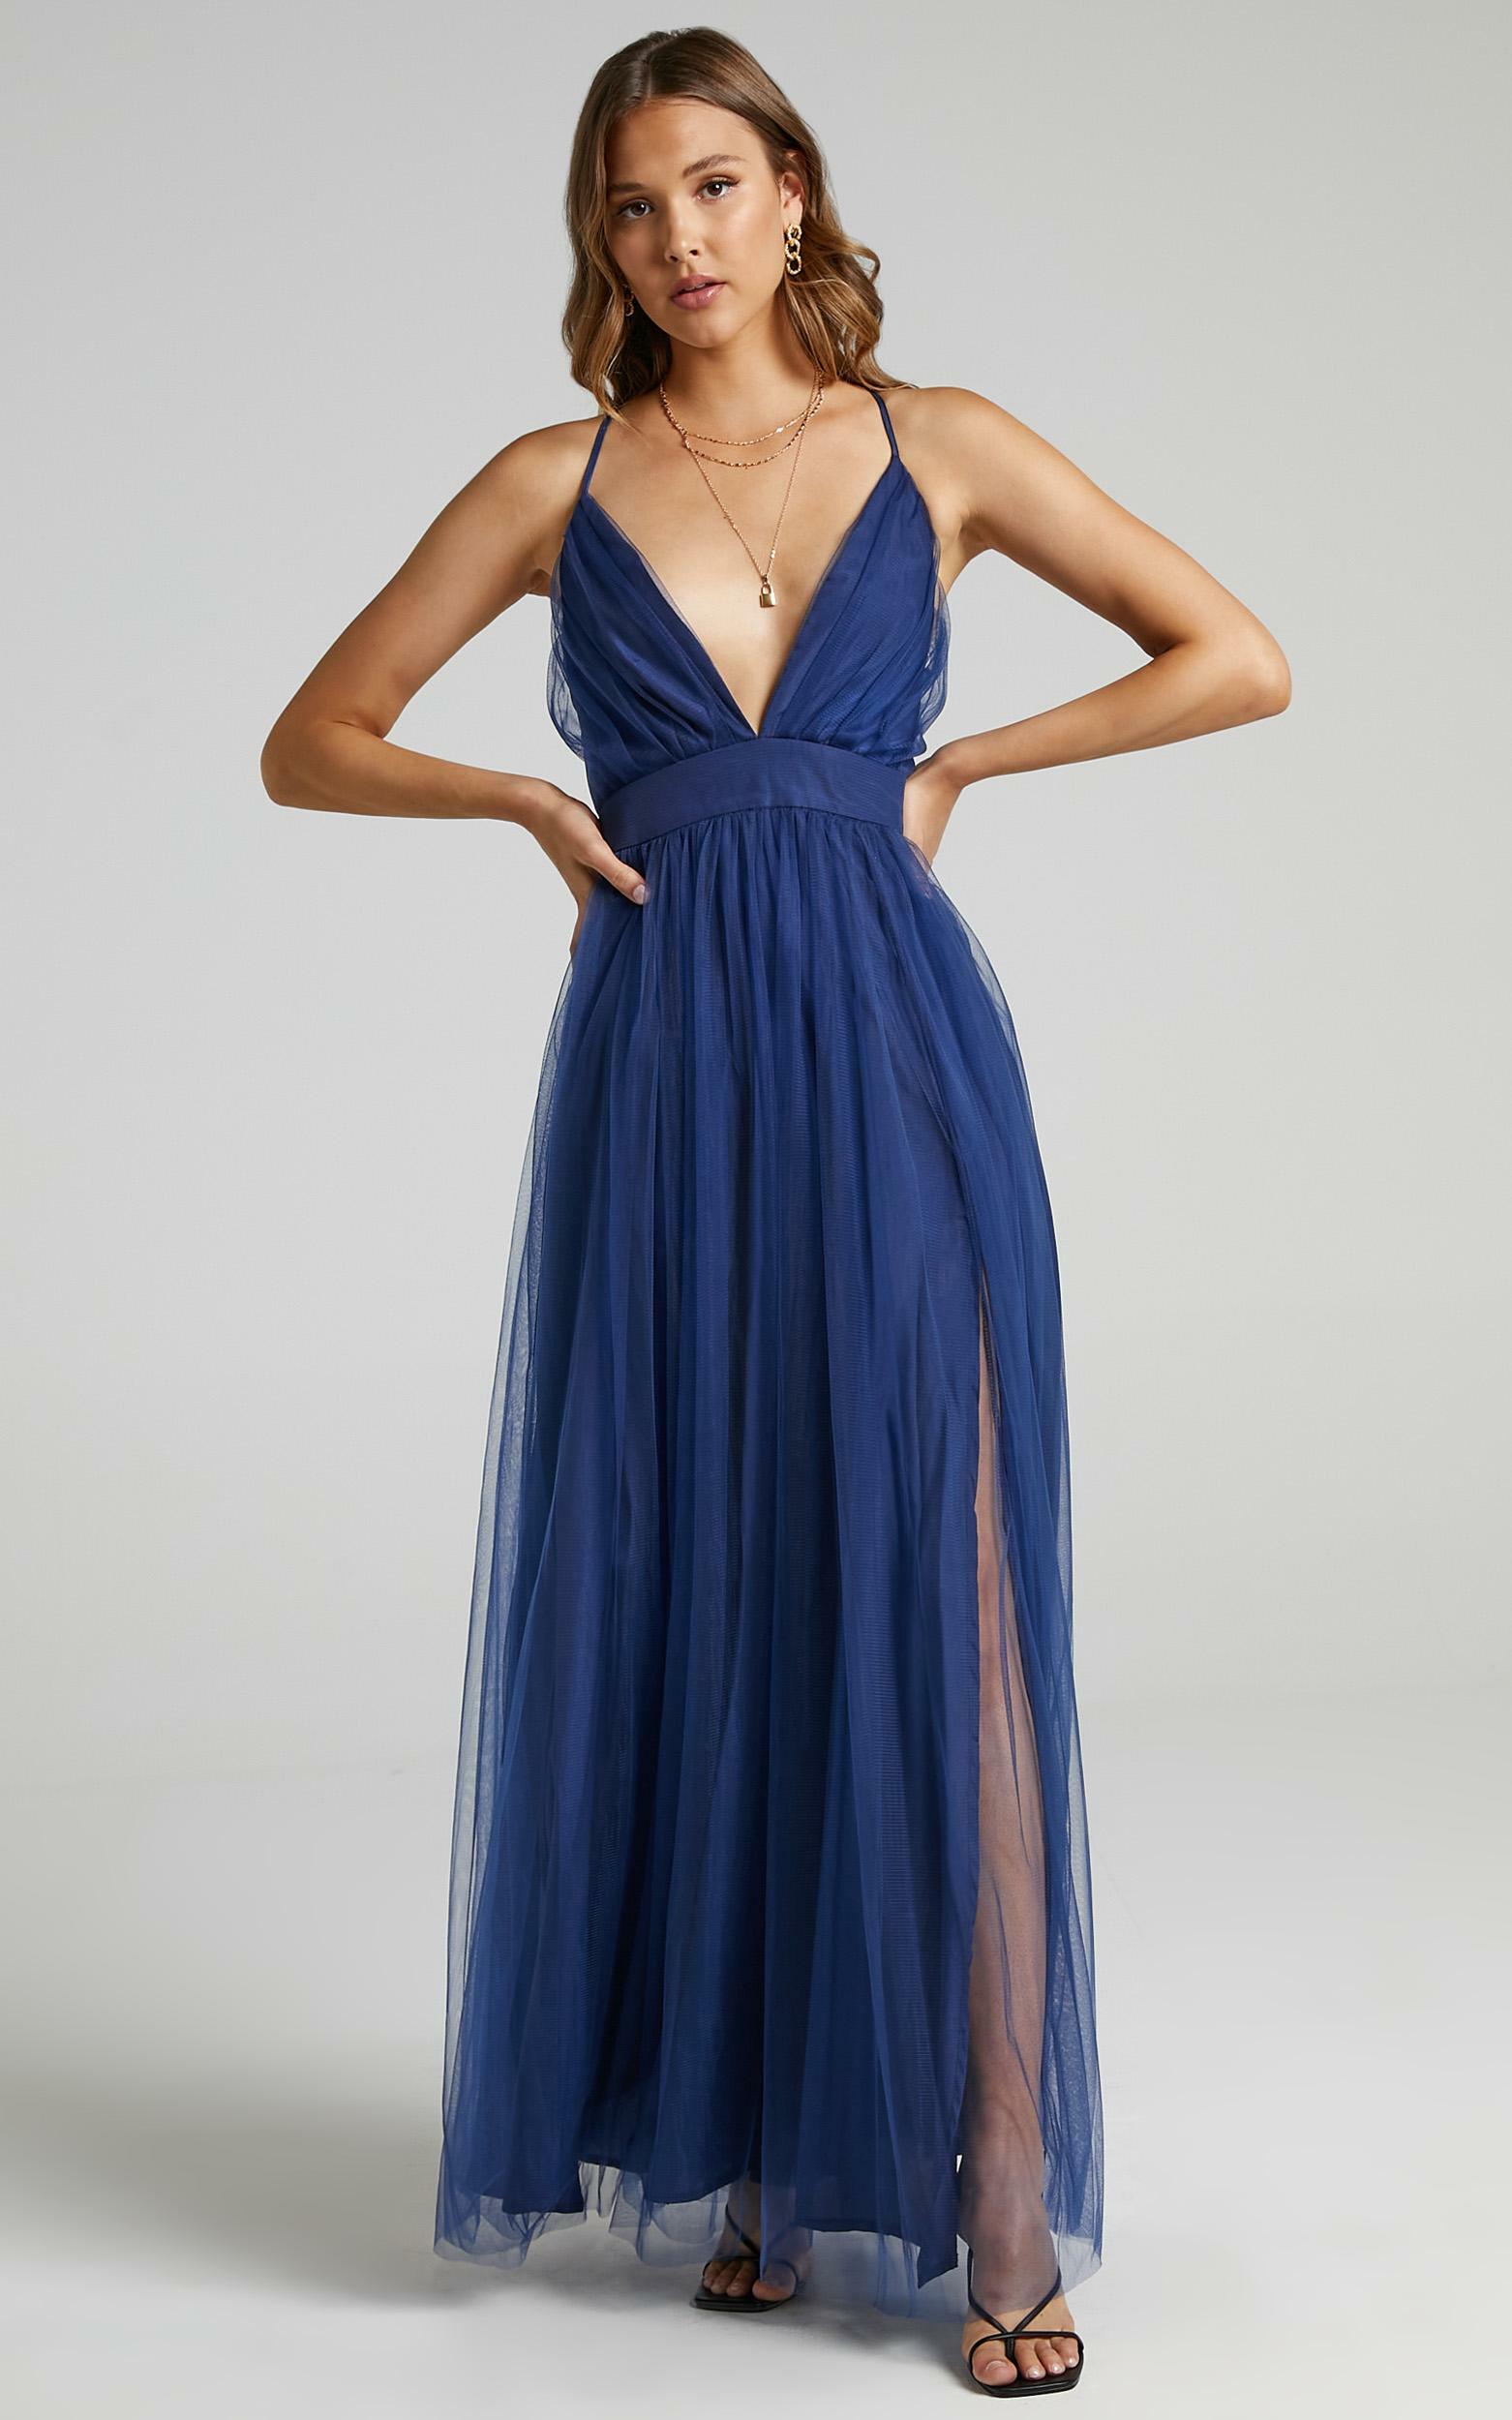 Tell Me Lies Dress in Navy Tulle - 04, NVY3, hi-res image number null